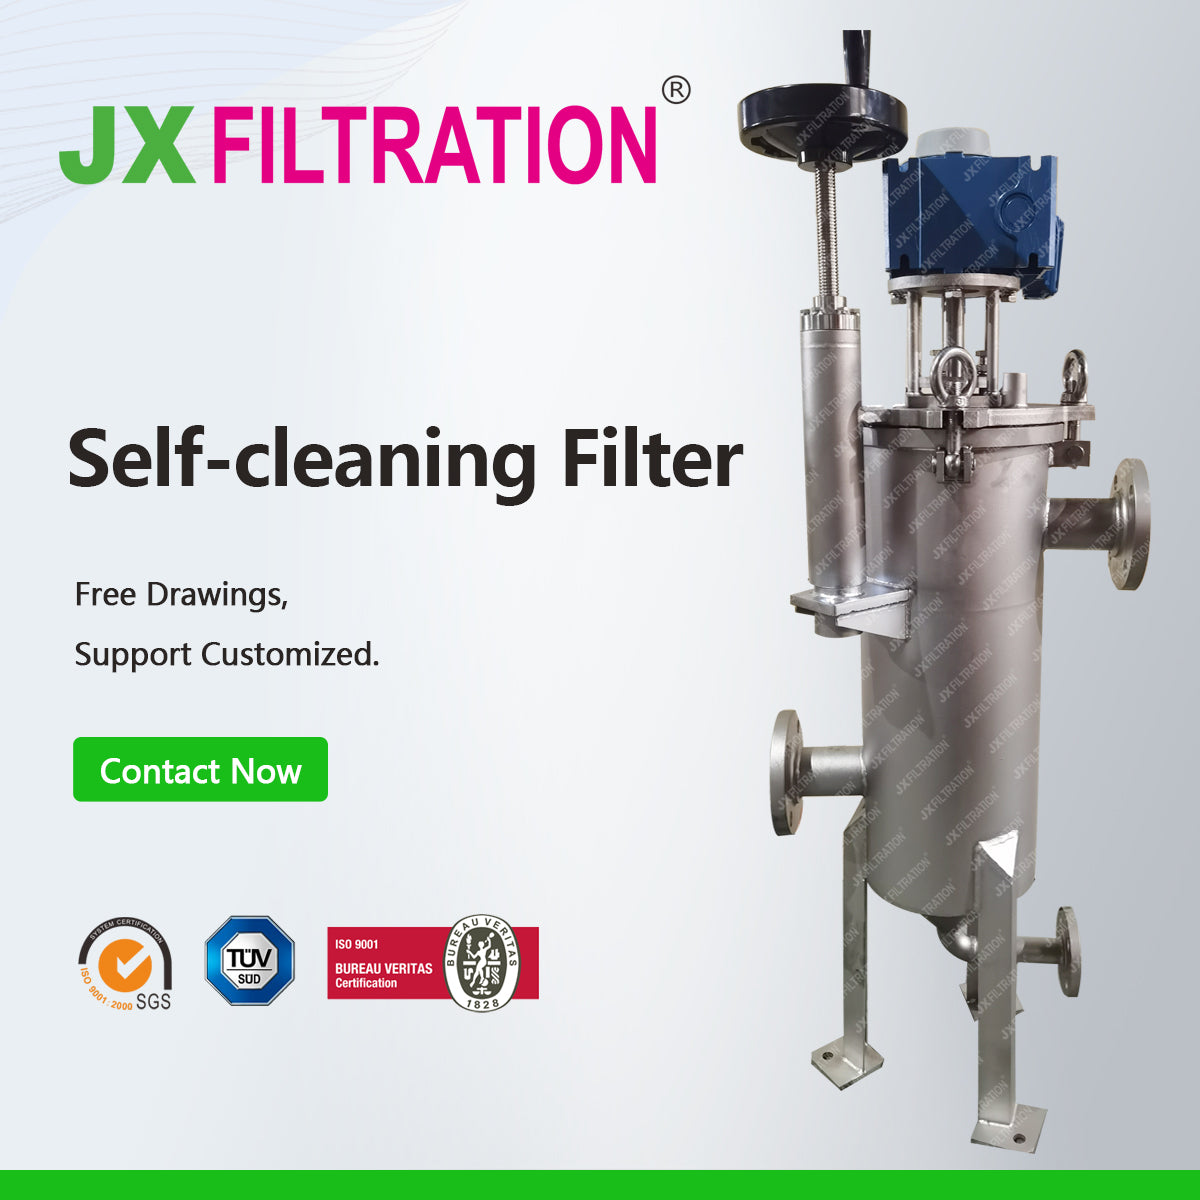 Model 530 Automatic Self-cleaning filter